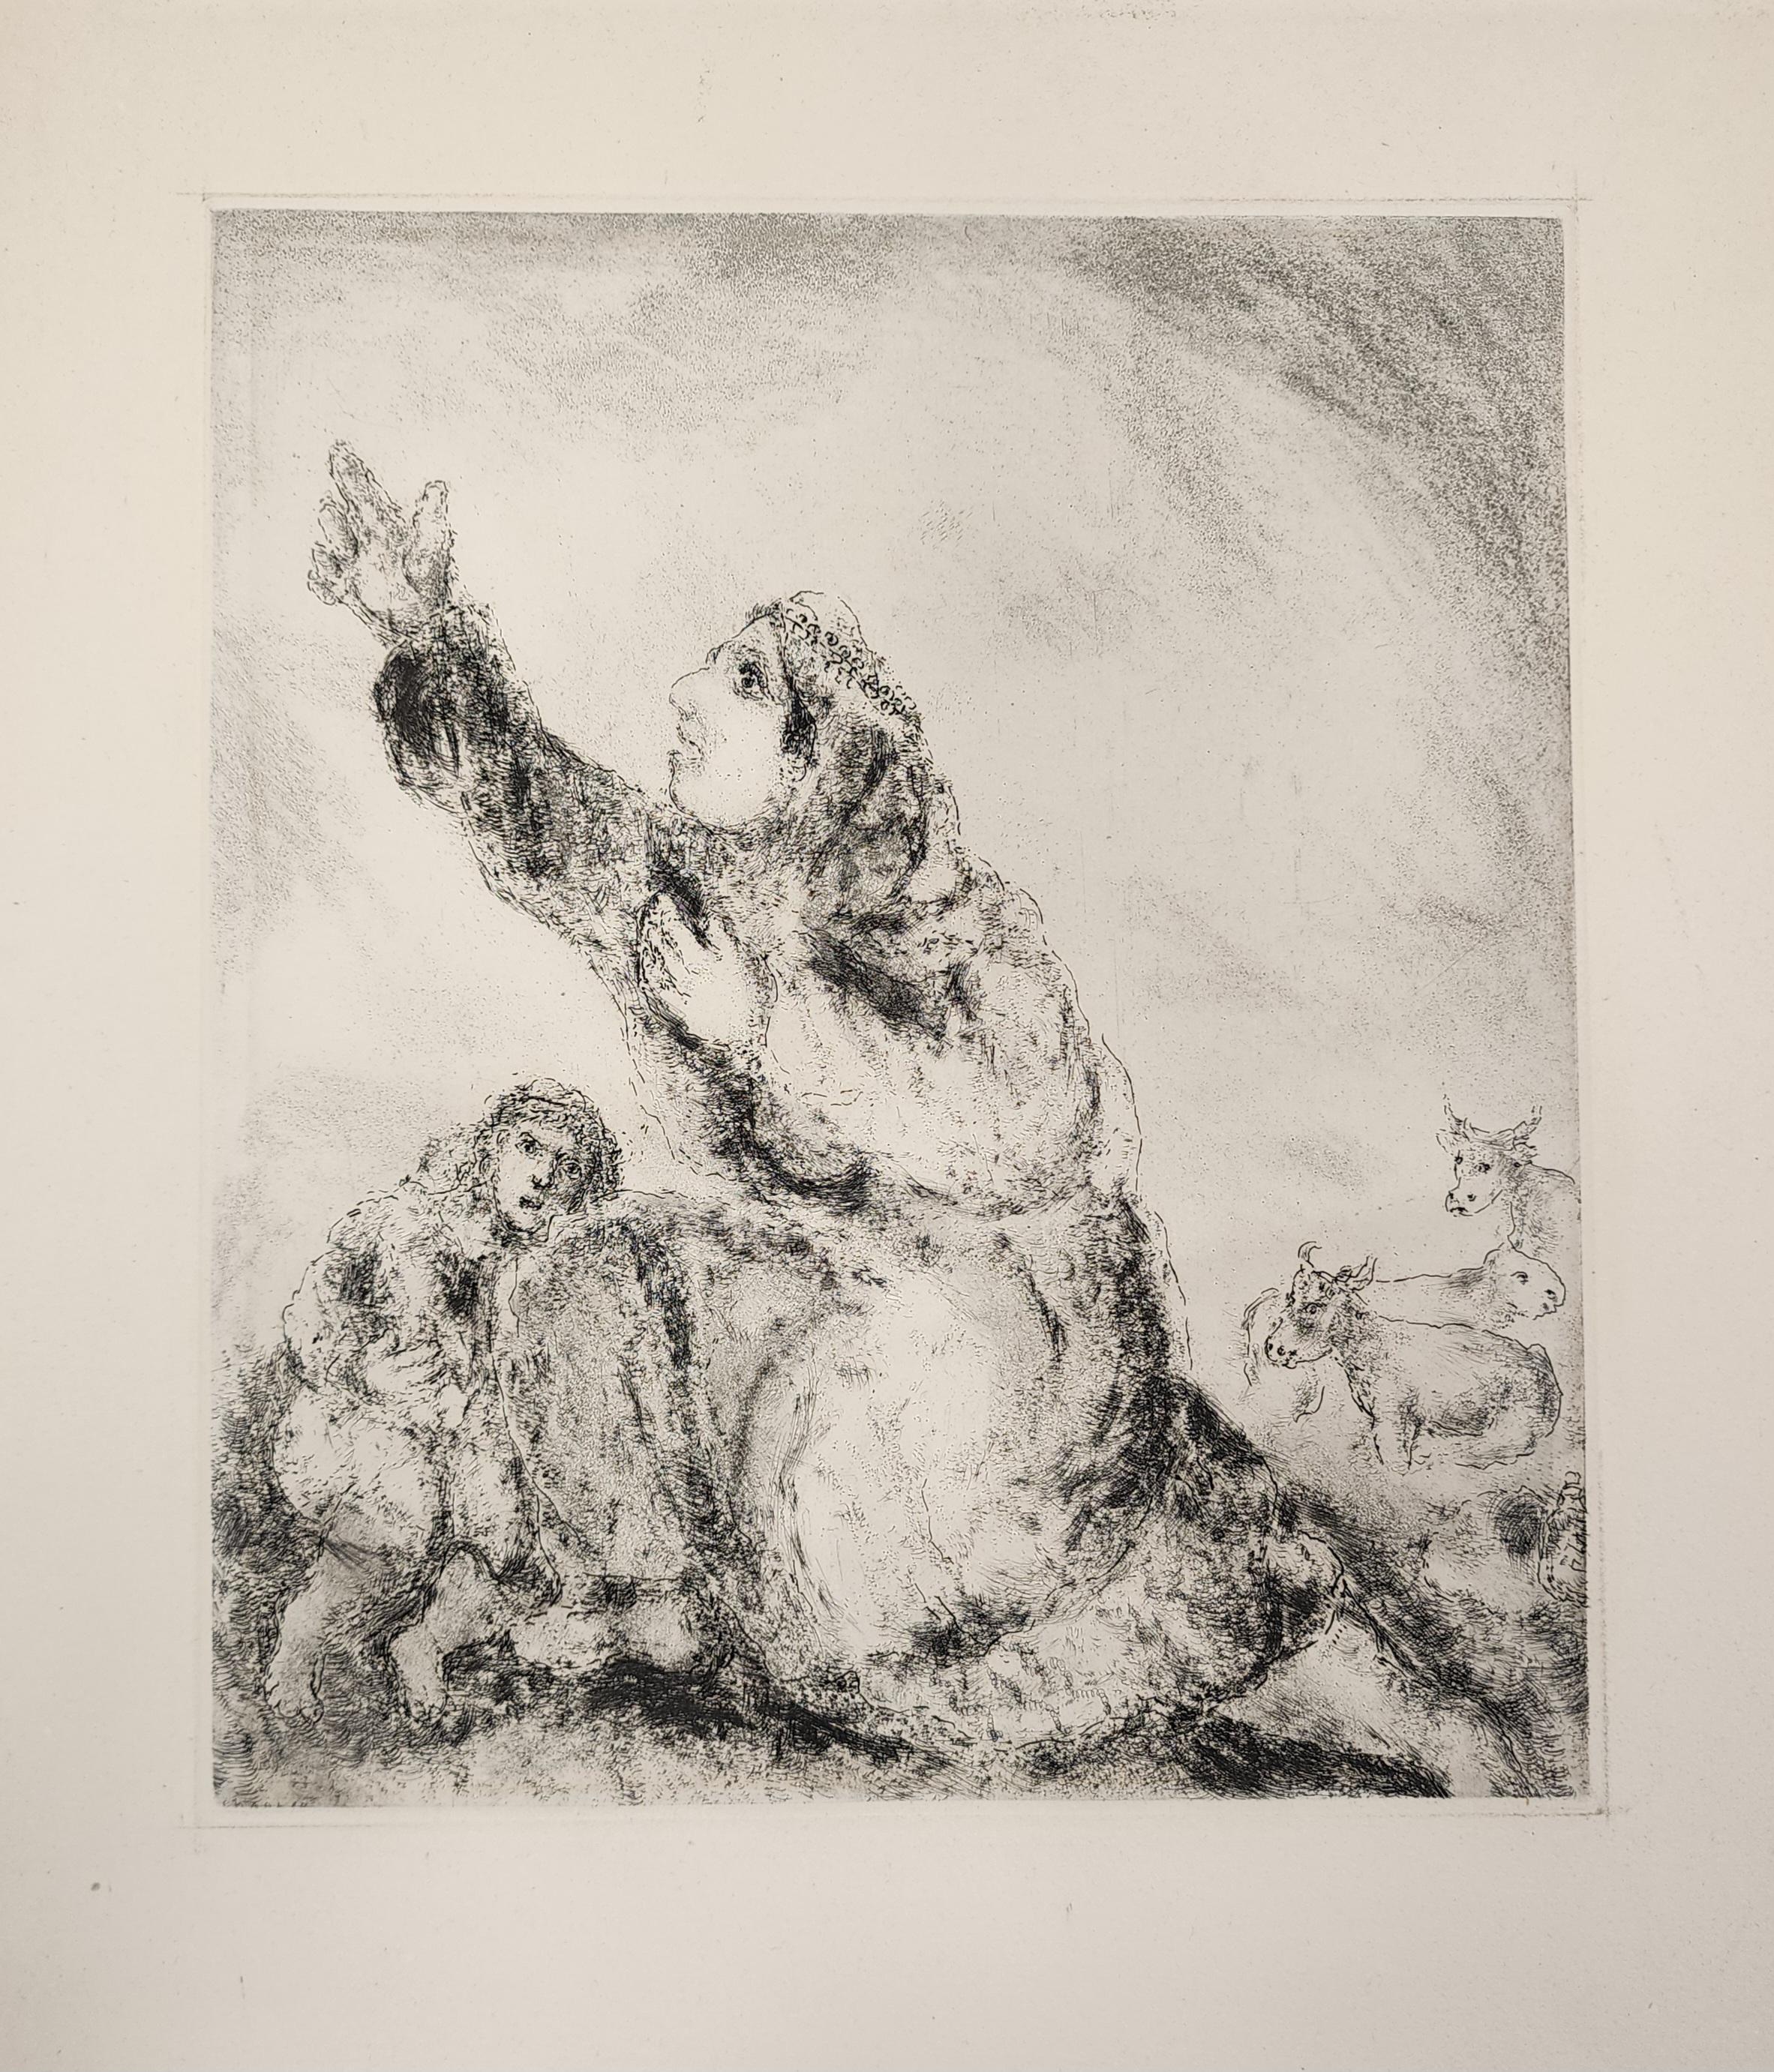 Artist: Marc Chagall
Title: Hannah Prays to The Lord
Year: 1956
Dimensions: 16.12" W: 12.37"
Medium: Etching, Unsigned
Condition: Excellent

After Chagall completed his etchings for The Fables (1930), Vollard again offered Chagall a commission, this